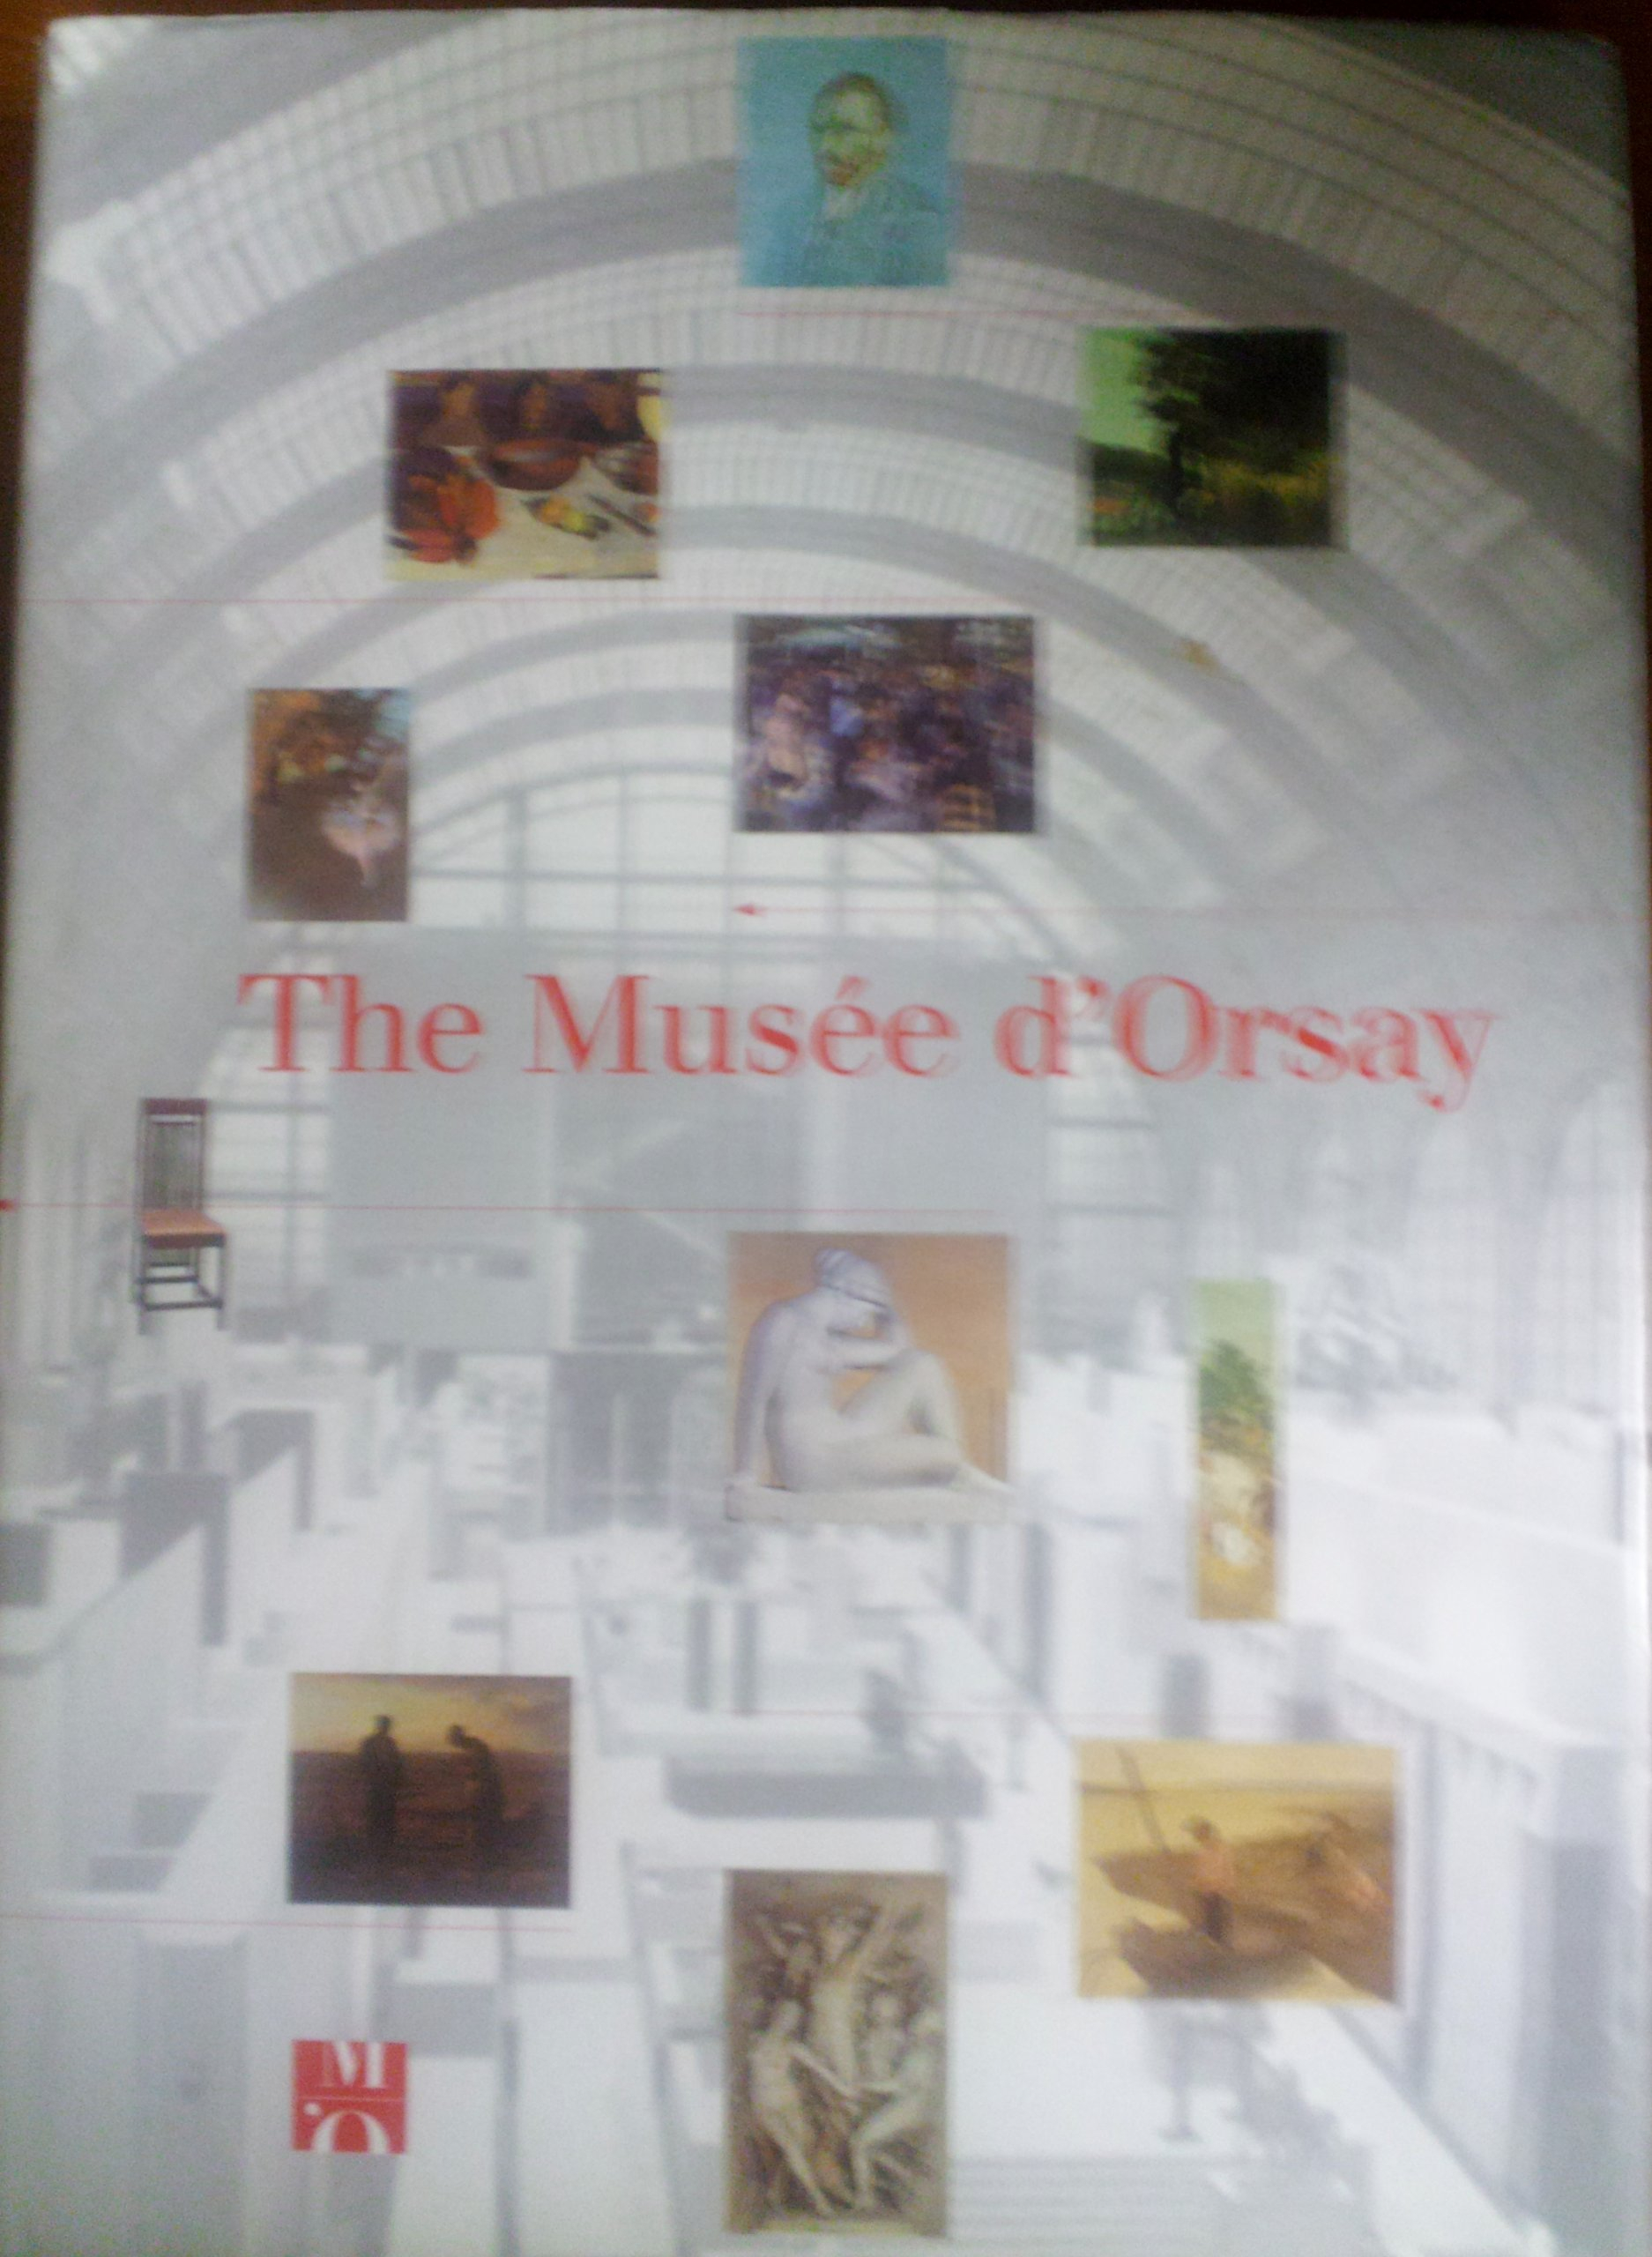 The musée d'Orsay